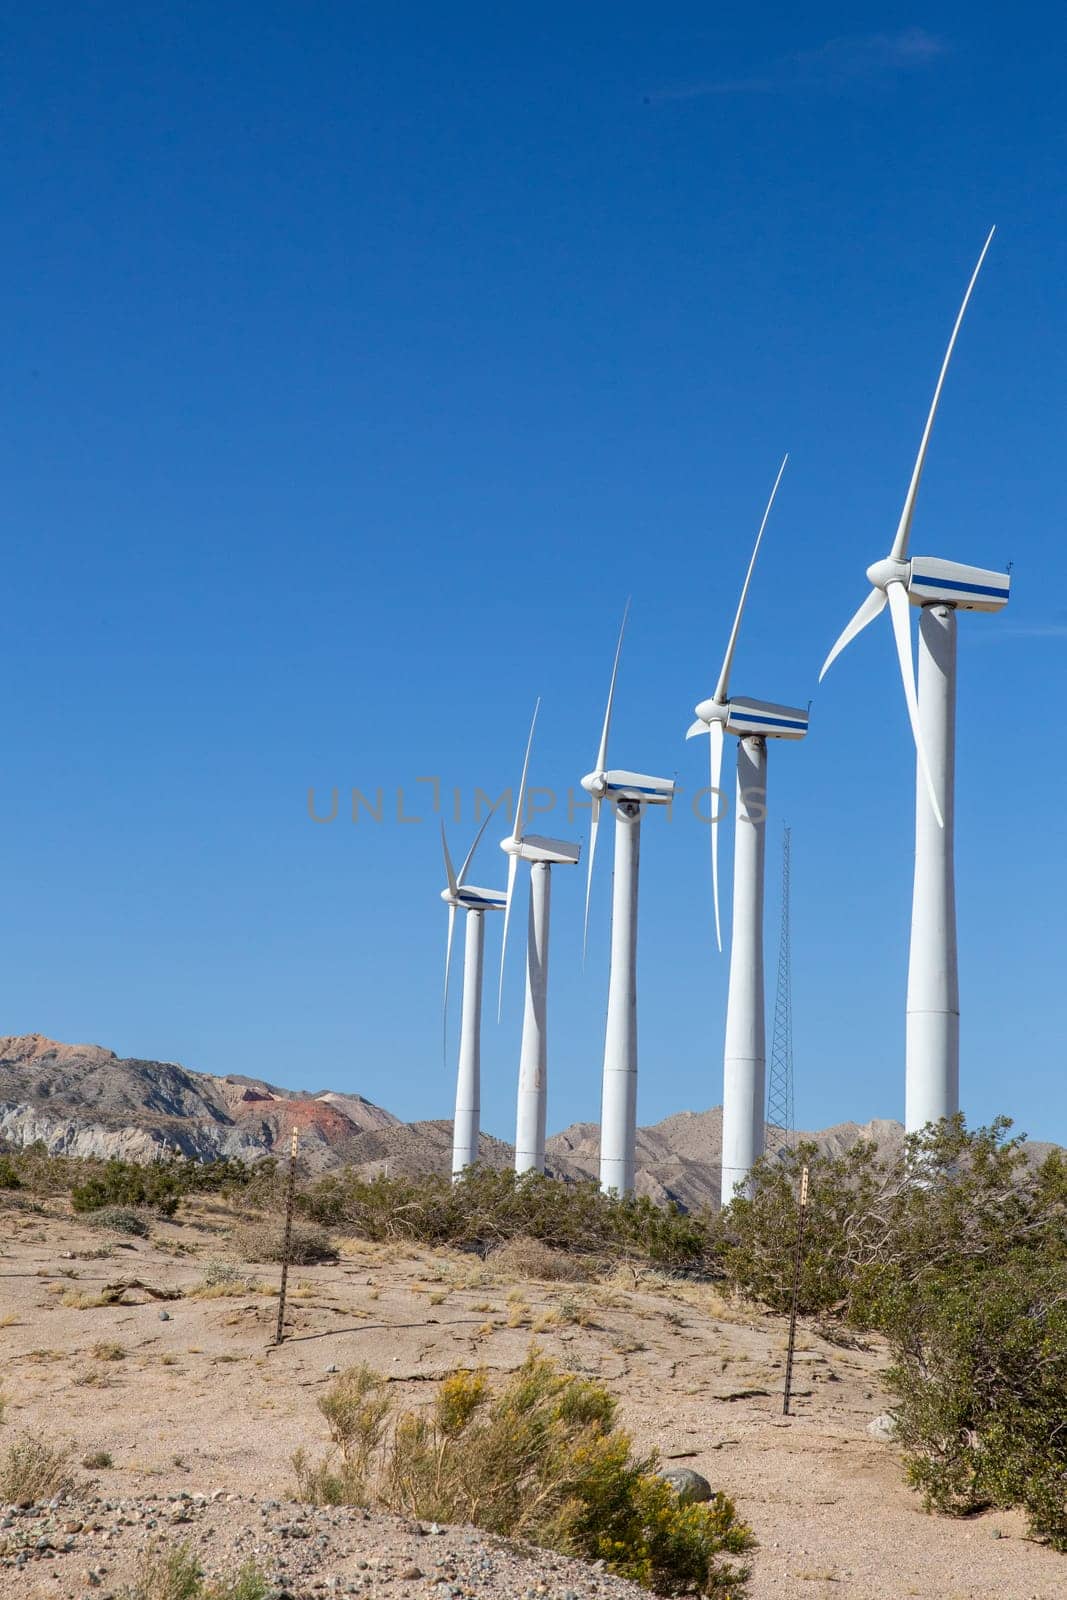 A Row of Wind turbines in the desert